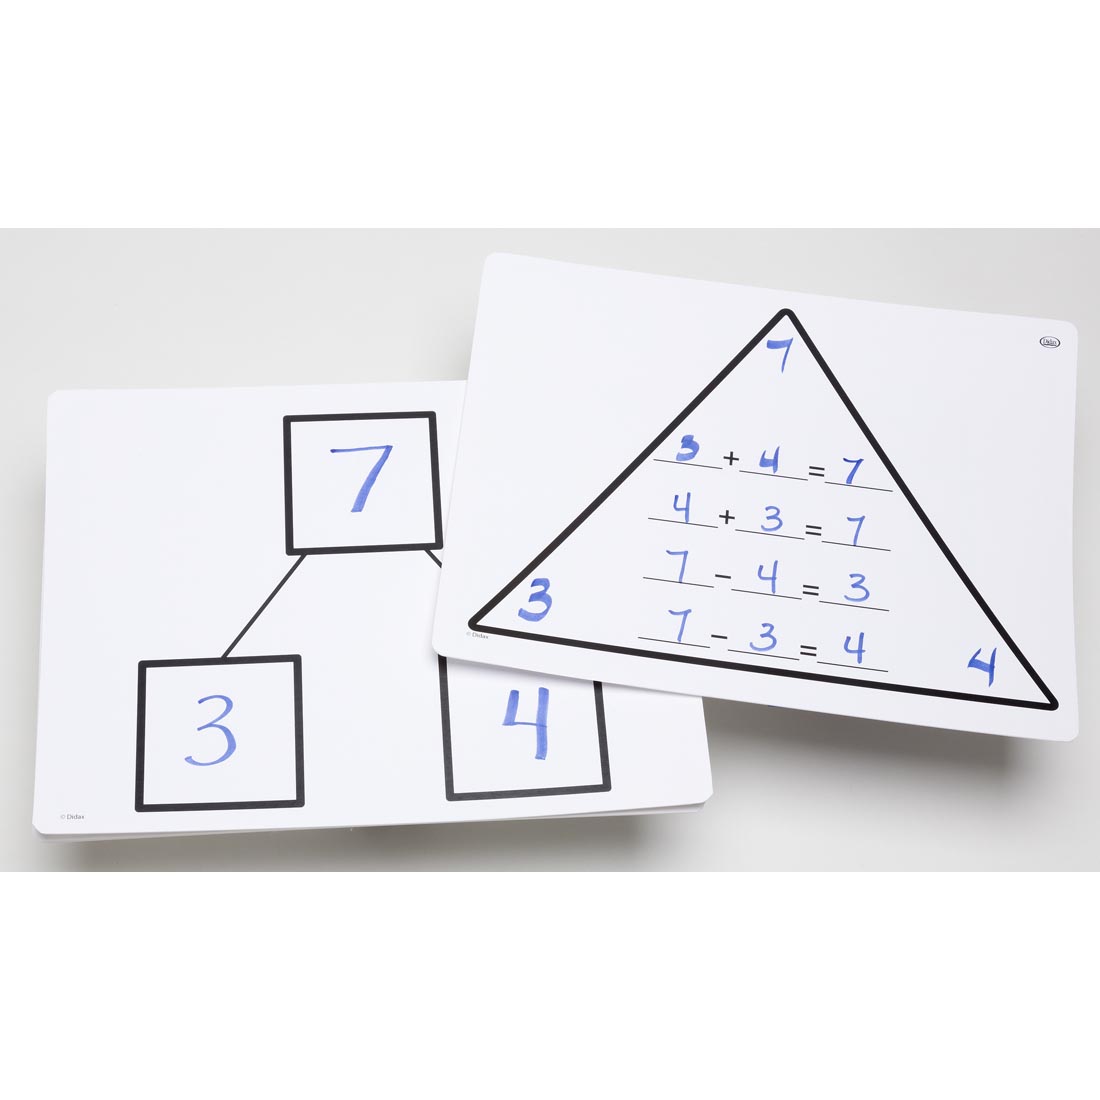 Sample Numbers Written on Front and Back Sides of a Write-On/Wipe-Off Addition/Subtraction Fact Family Triangle Mat by Didax